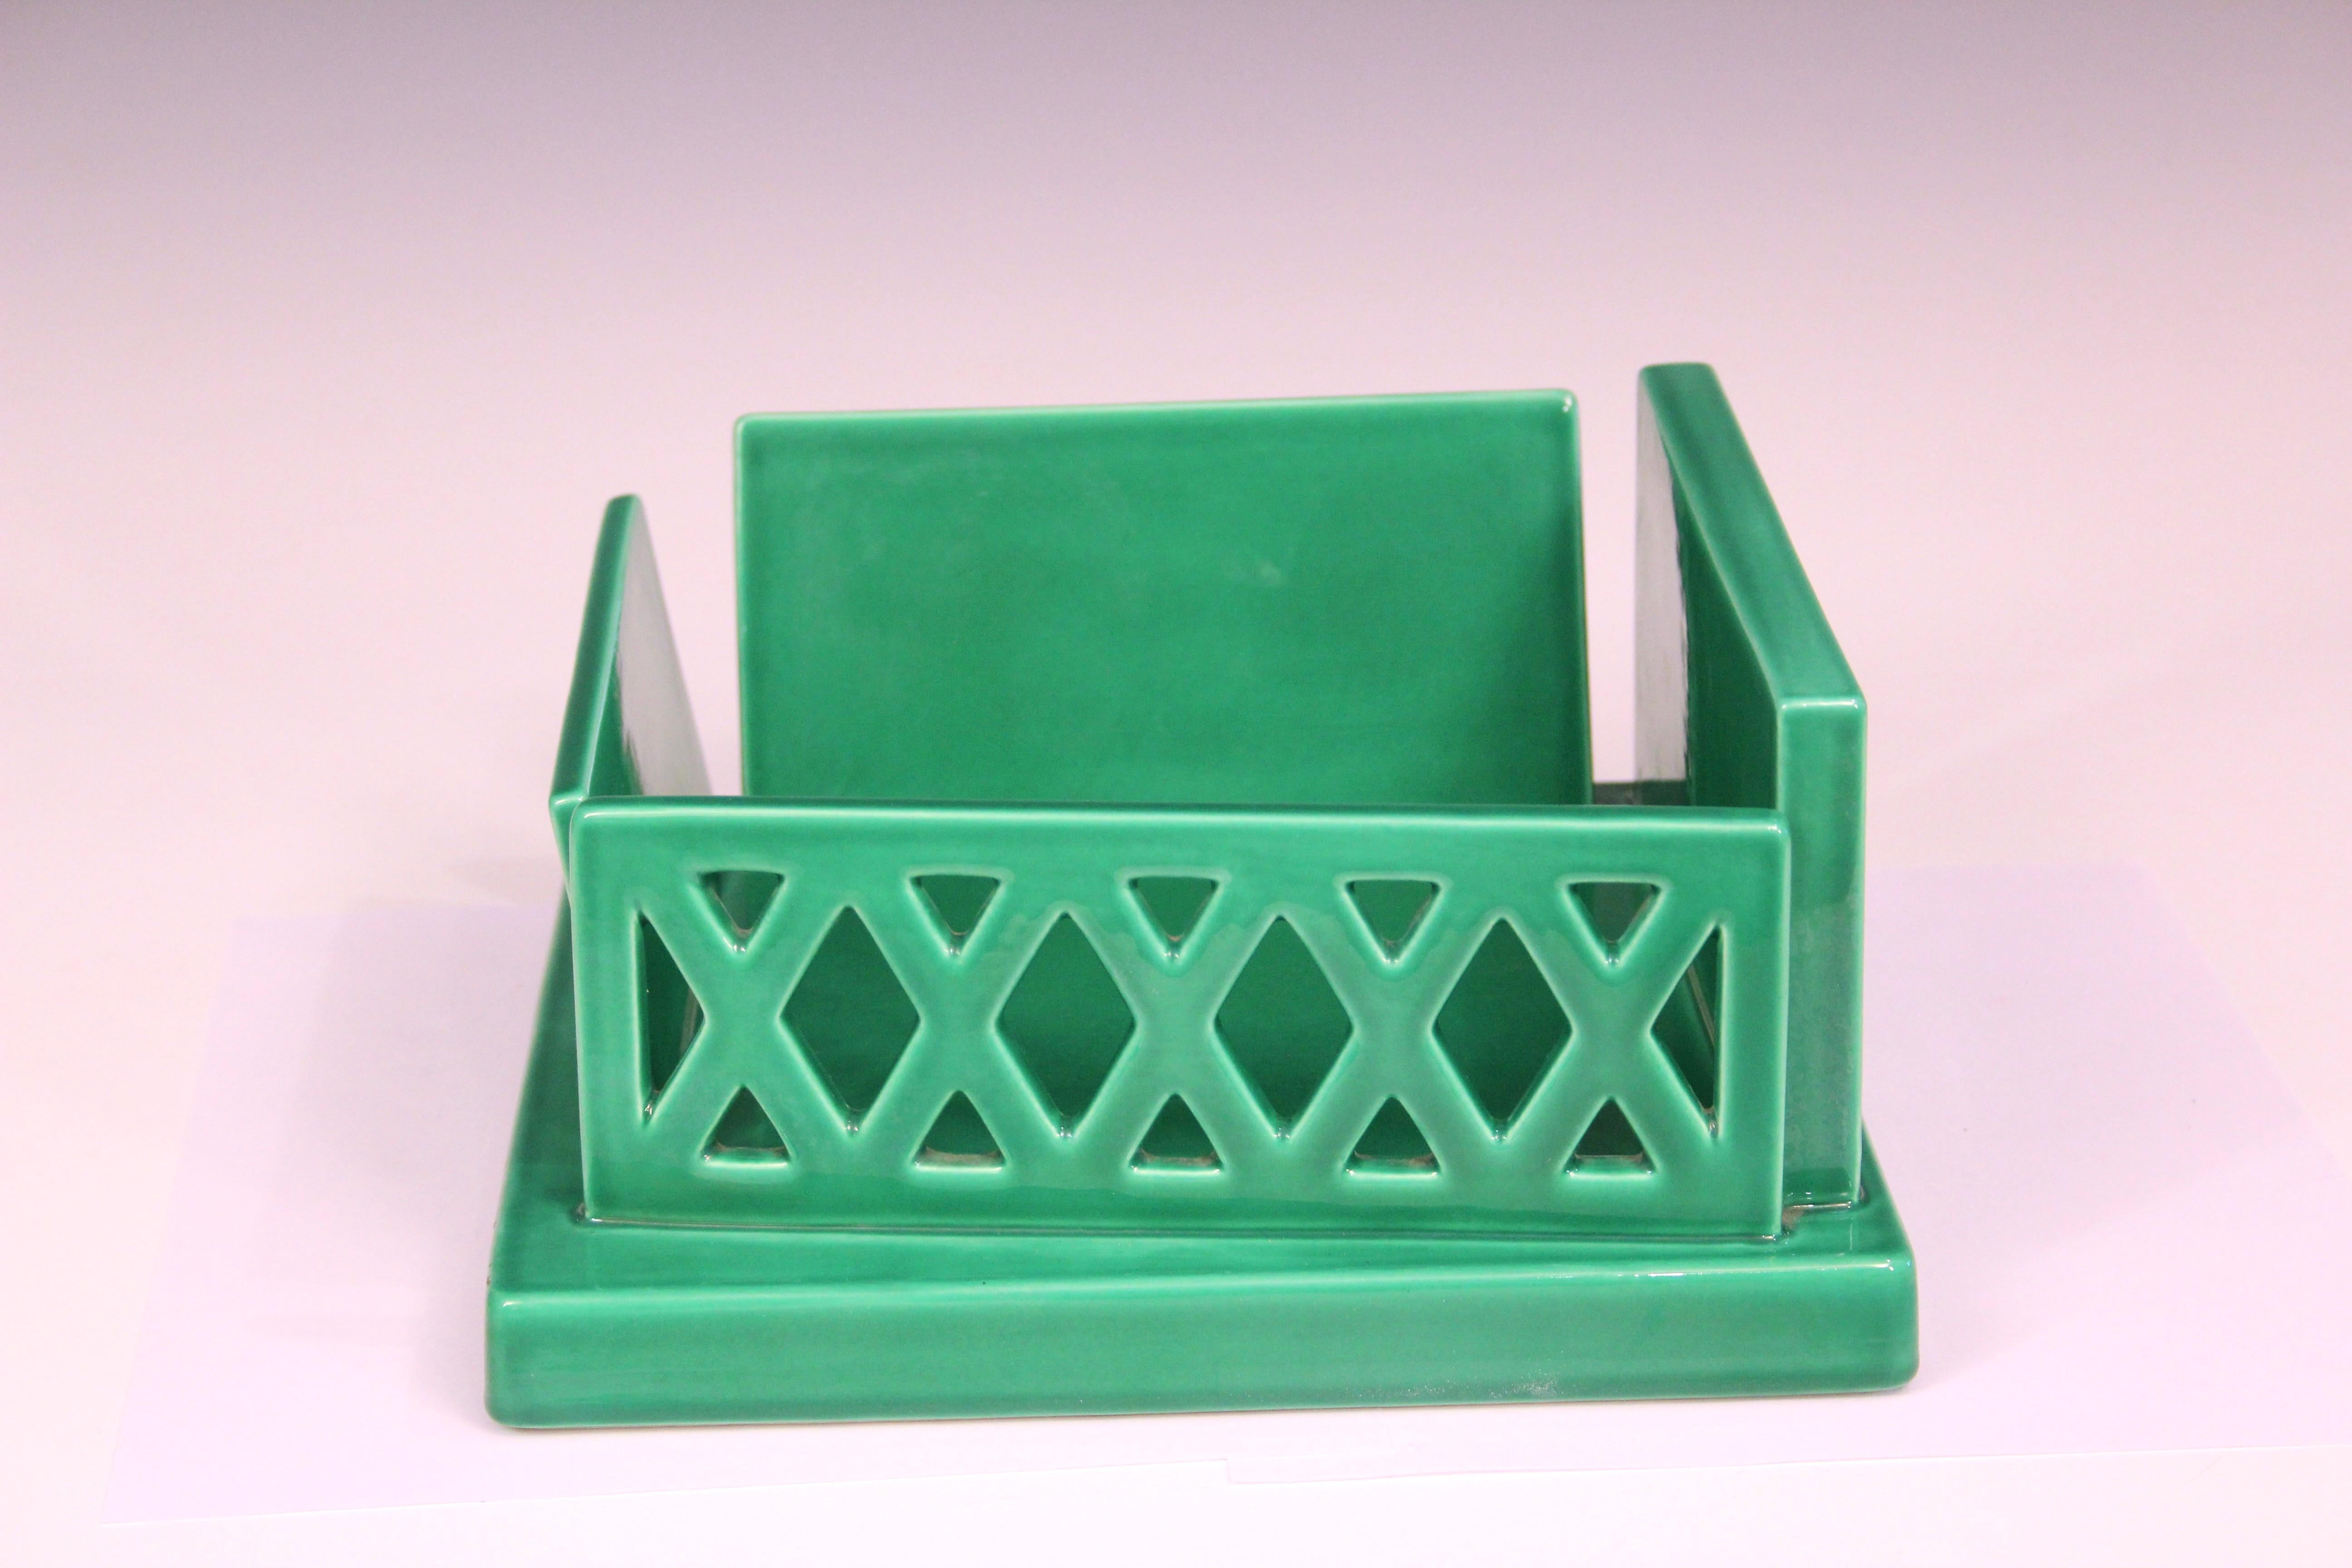 Vintage Ettore Sottsass ET4 postmodern centerpiece with lopsided walls and garden green glaze produced by Alessio Sarri, circa 1980's. 4 3/4